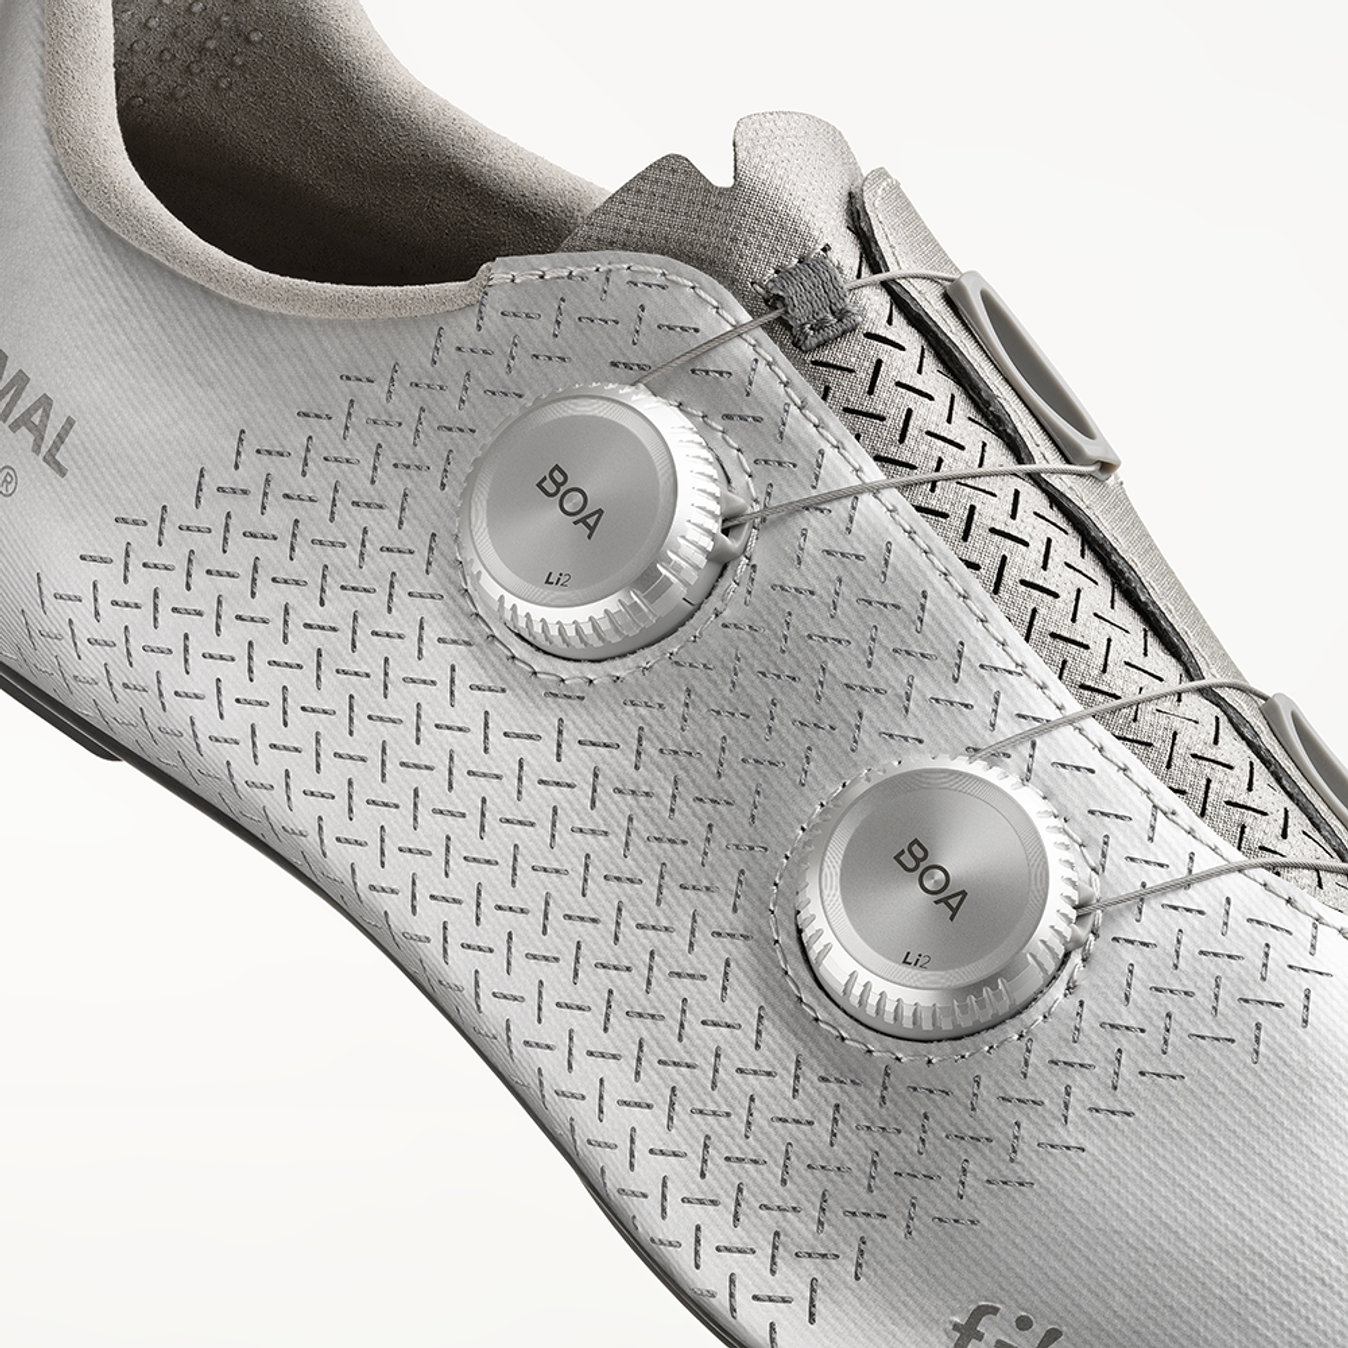 The shoe uses Boa's silver Dual-Dial system